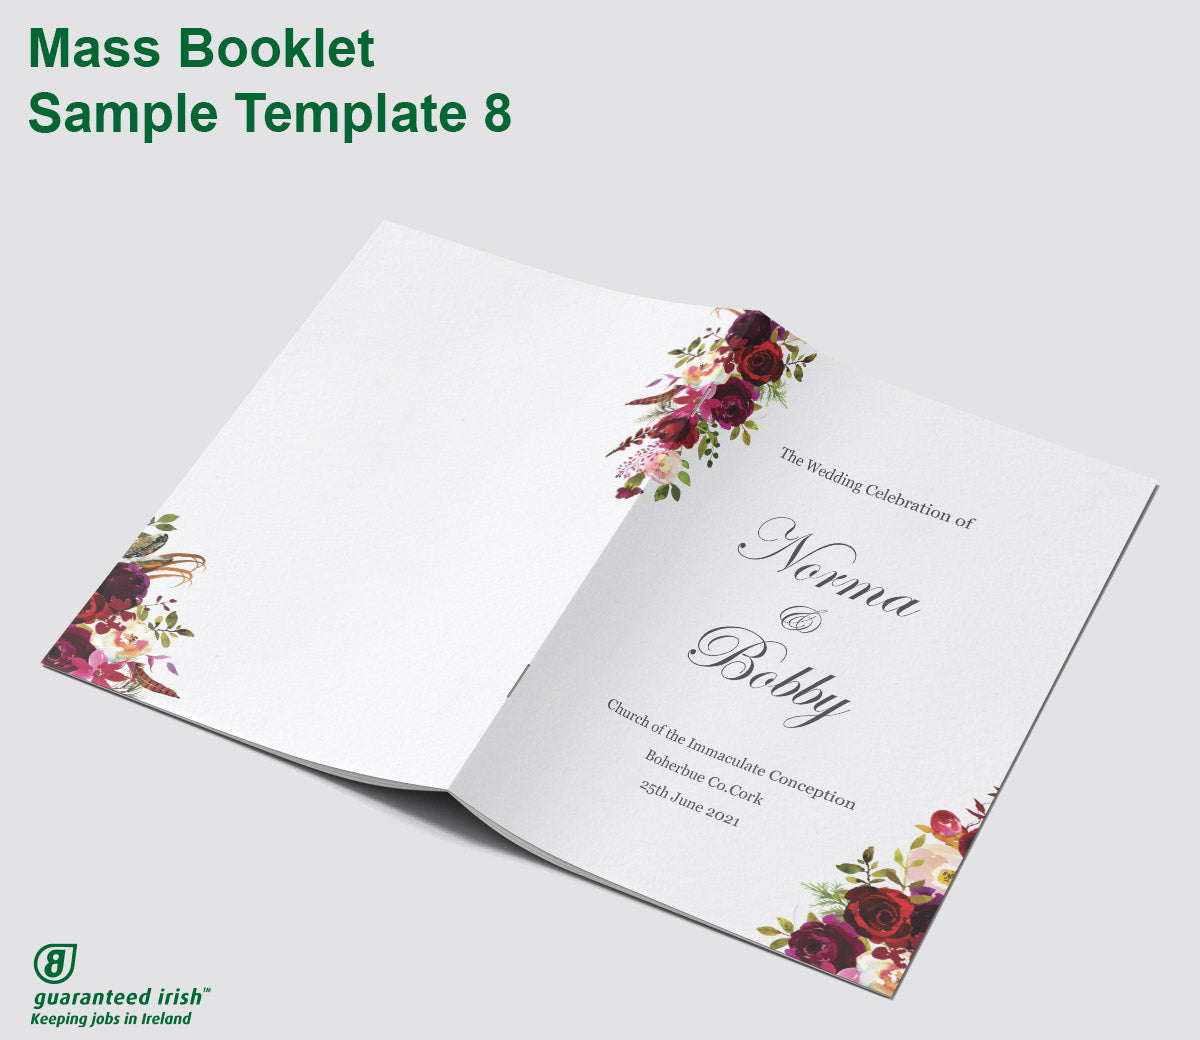 wedding-mass-booklets-printing-dublin-nationwide-delivery-reads-ie